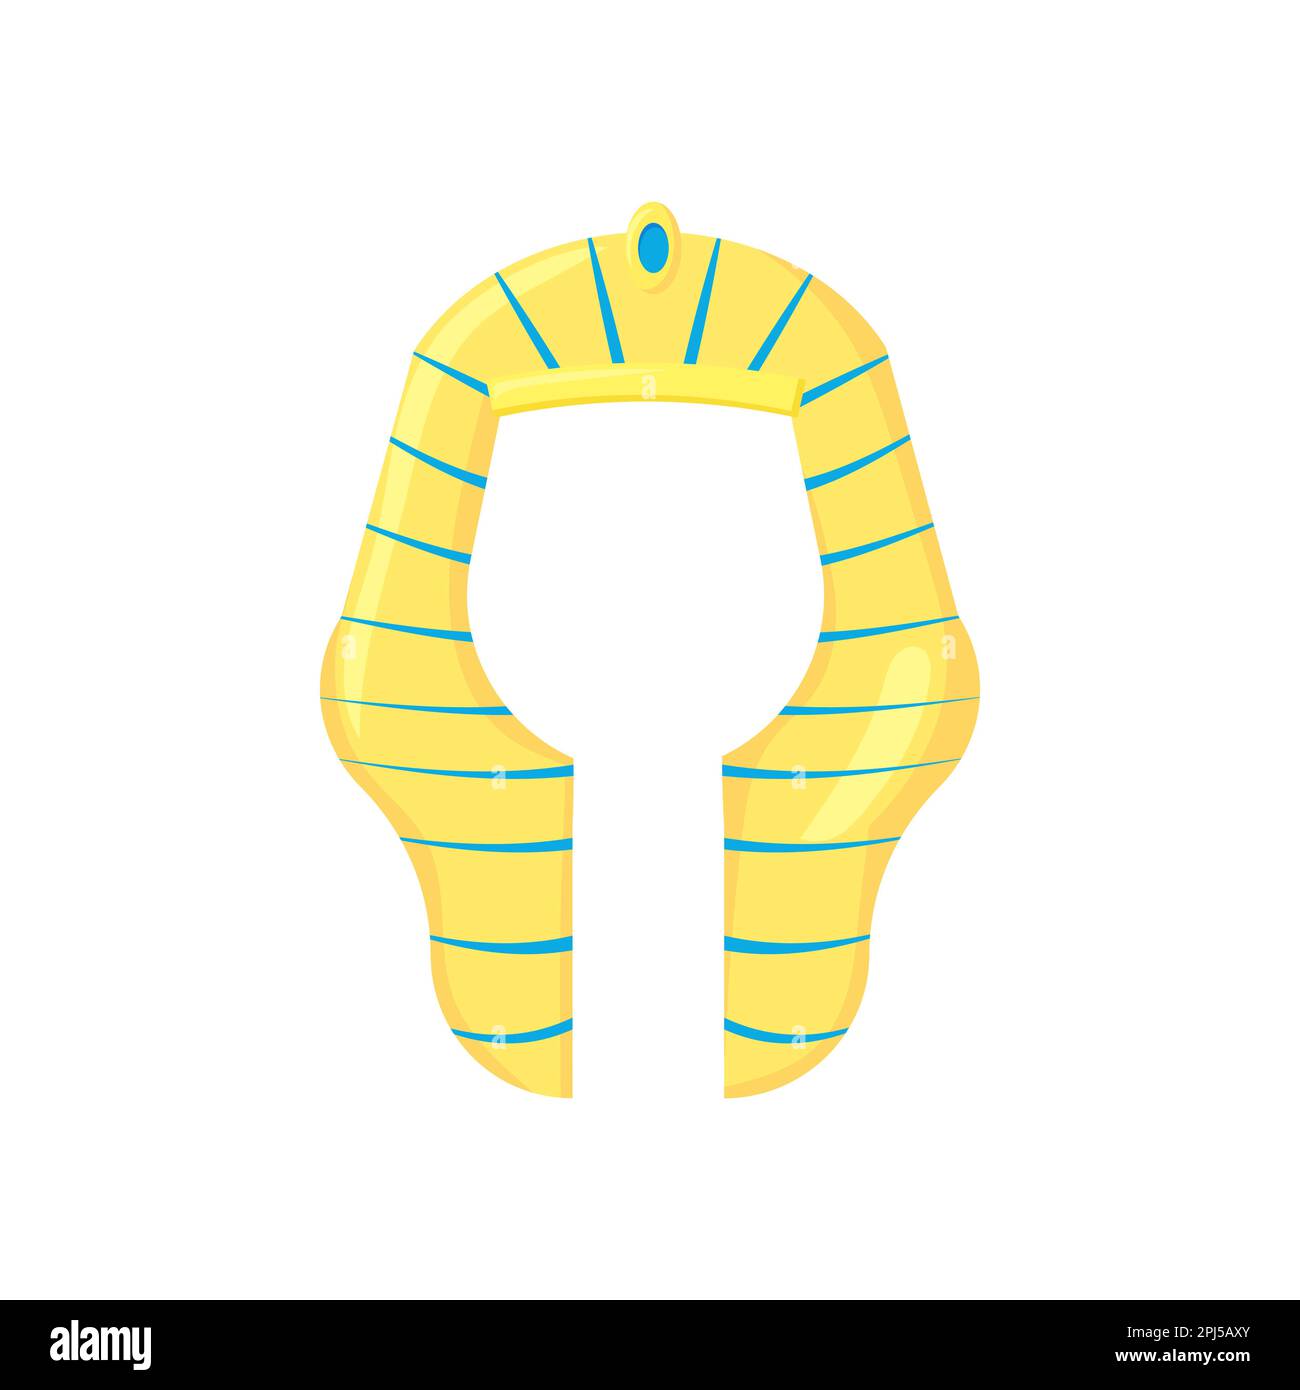 Ancient egyptian headdress template. Pharaoh and nobleman hat Stock Vector